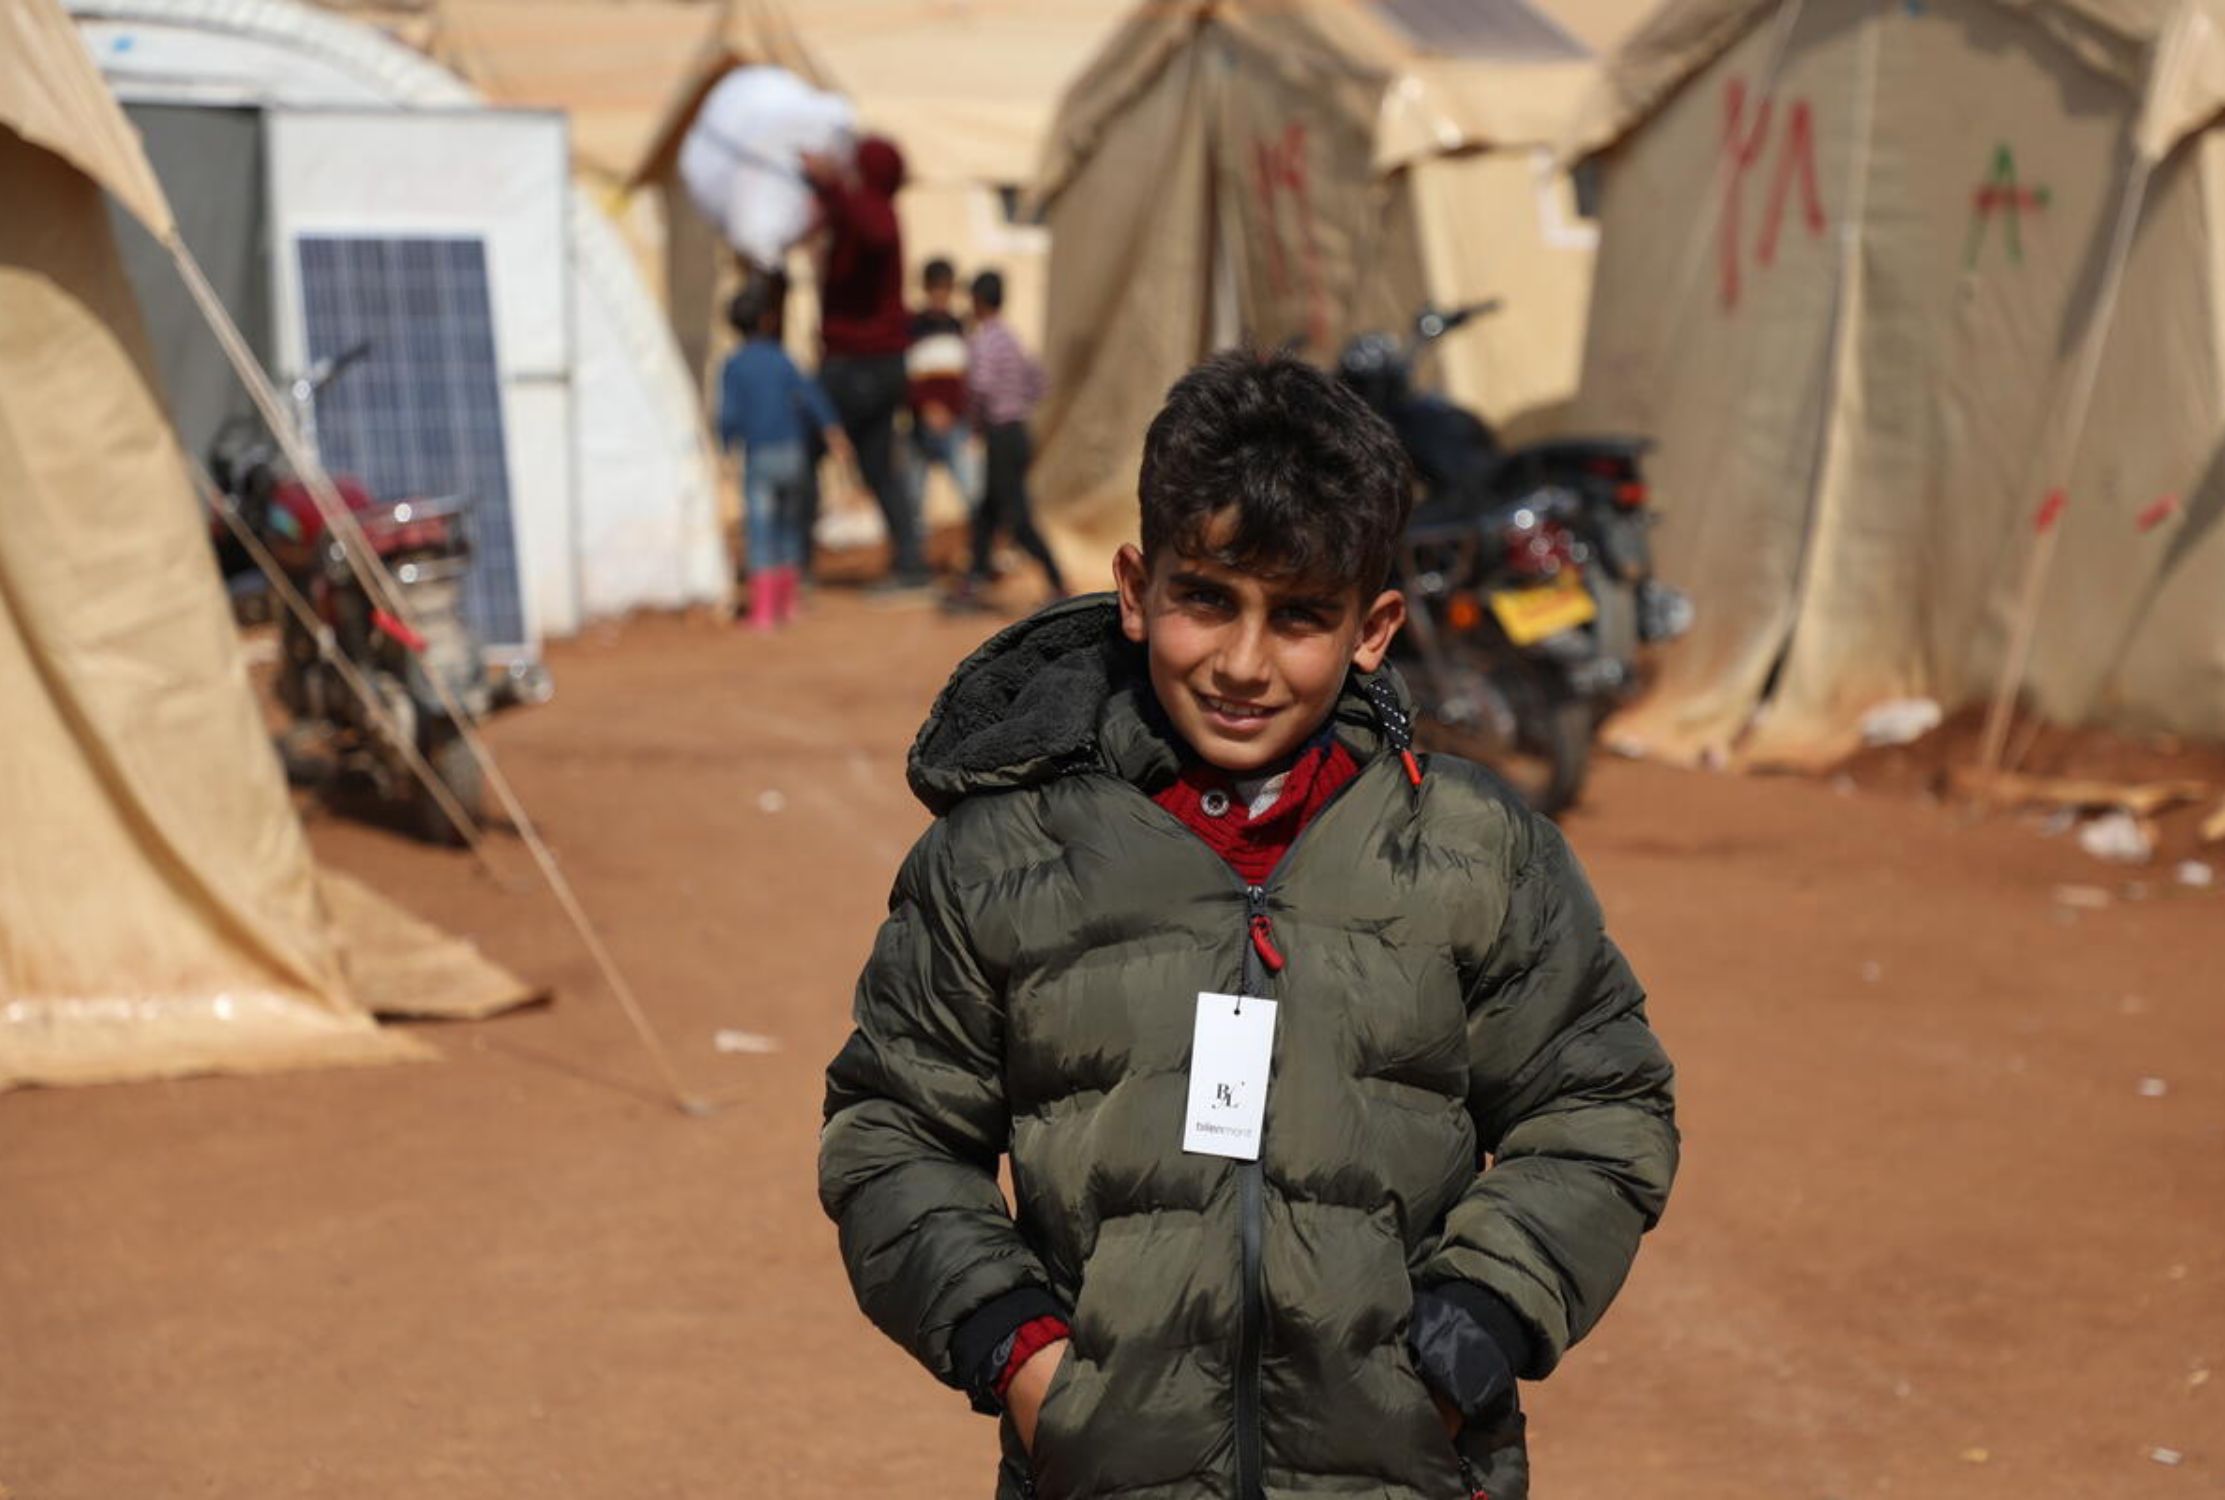 A Syrian boy looks at the camera, he is surrounded by tents in a refugee camp